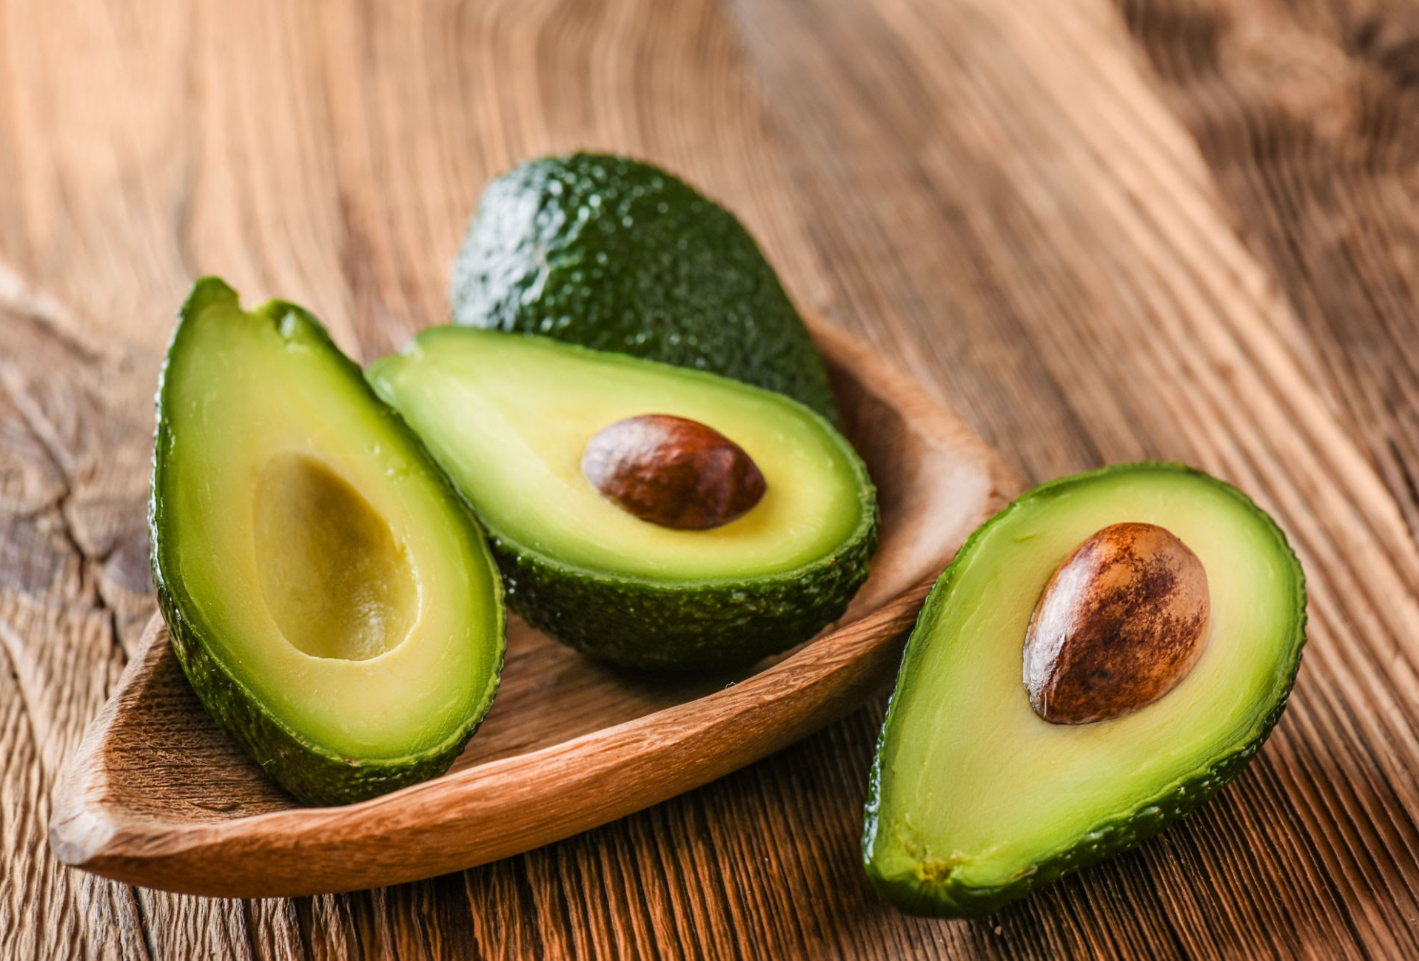 Research finds that avocados contain flavonoids that promote gut health